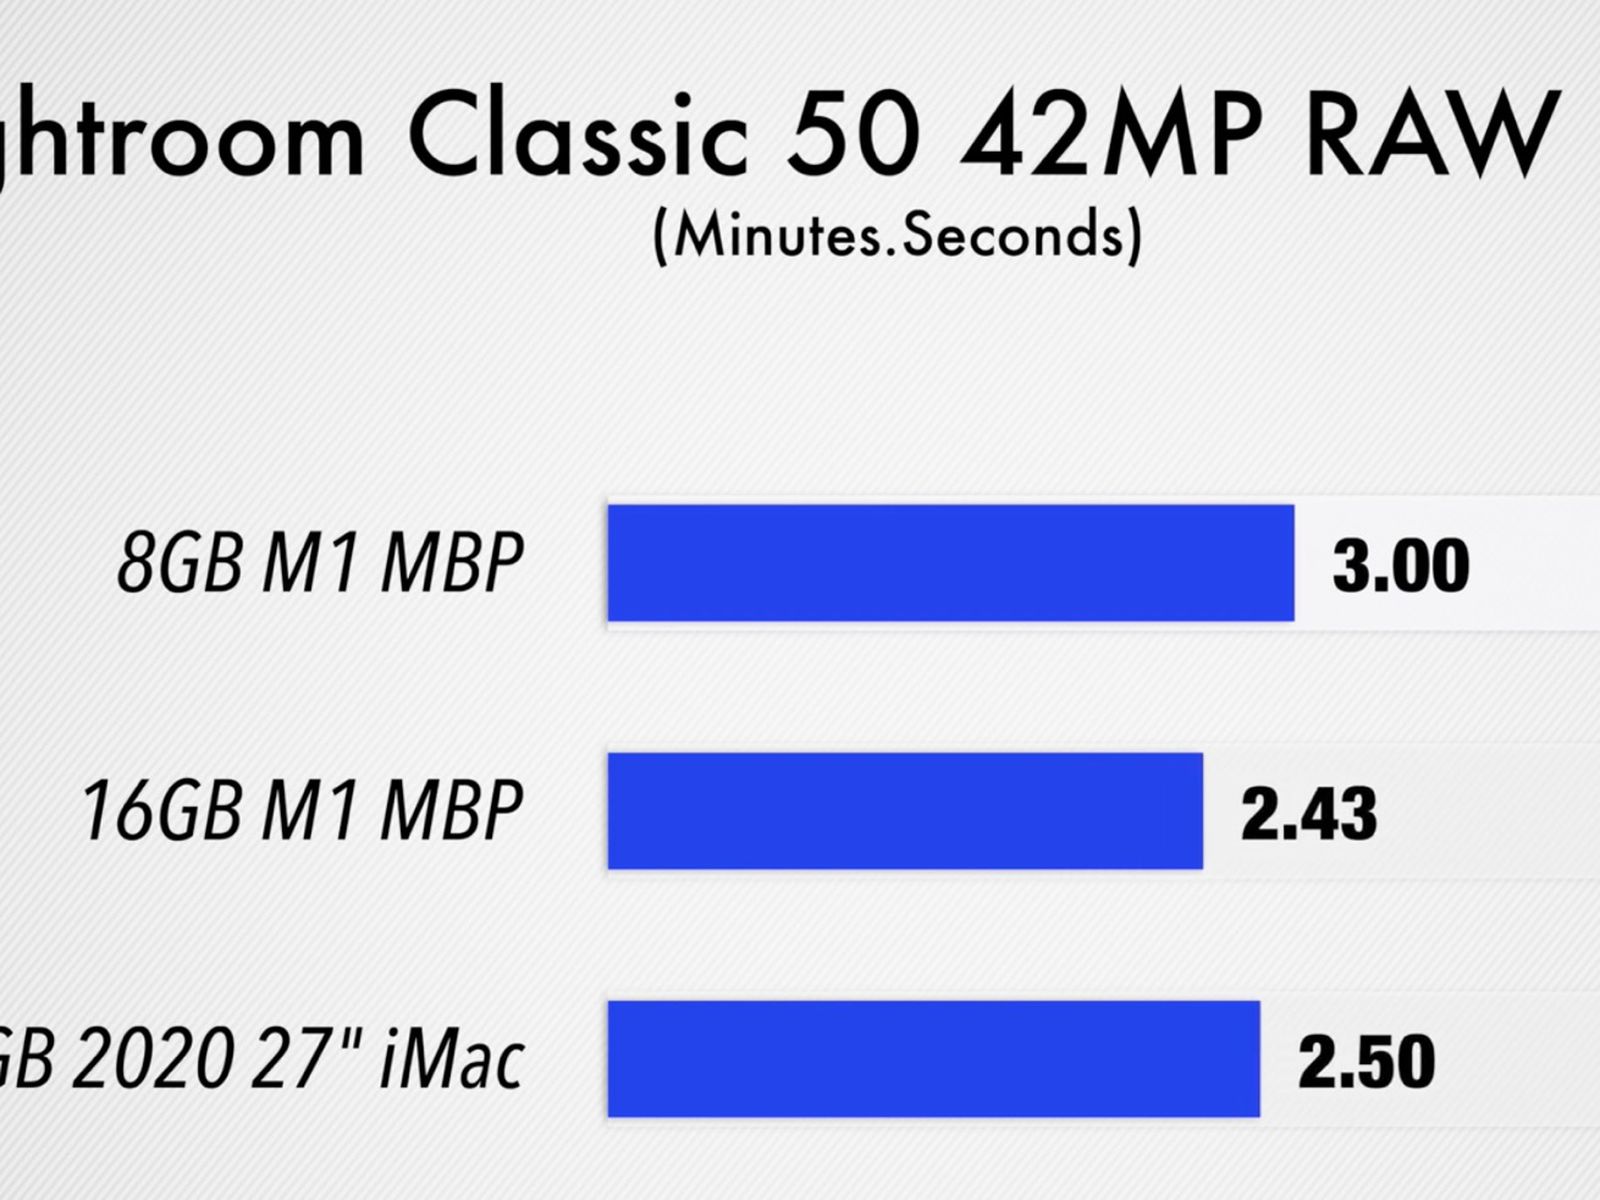 does 8gb vs 16gb ram make a big difference